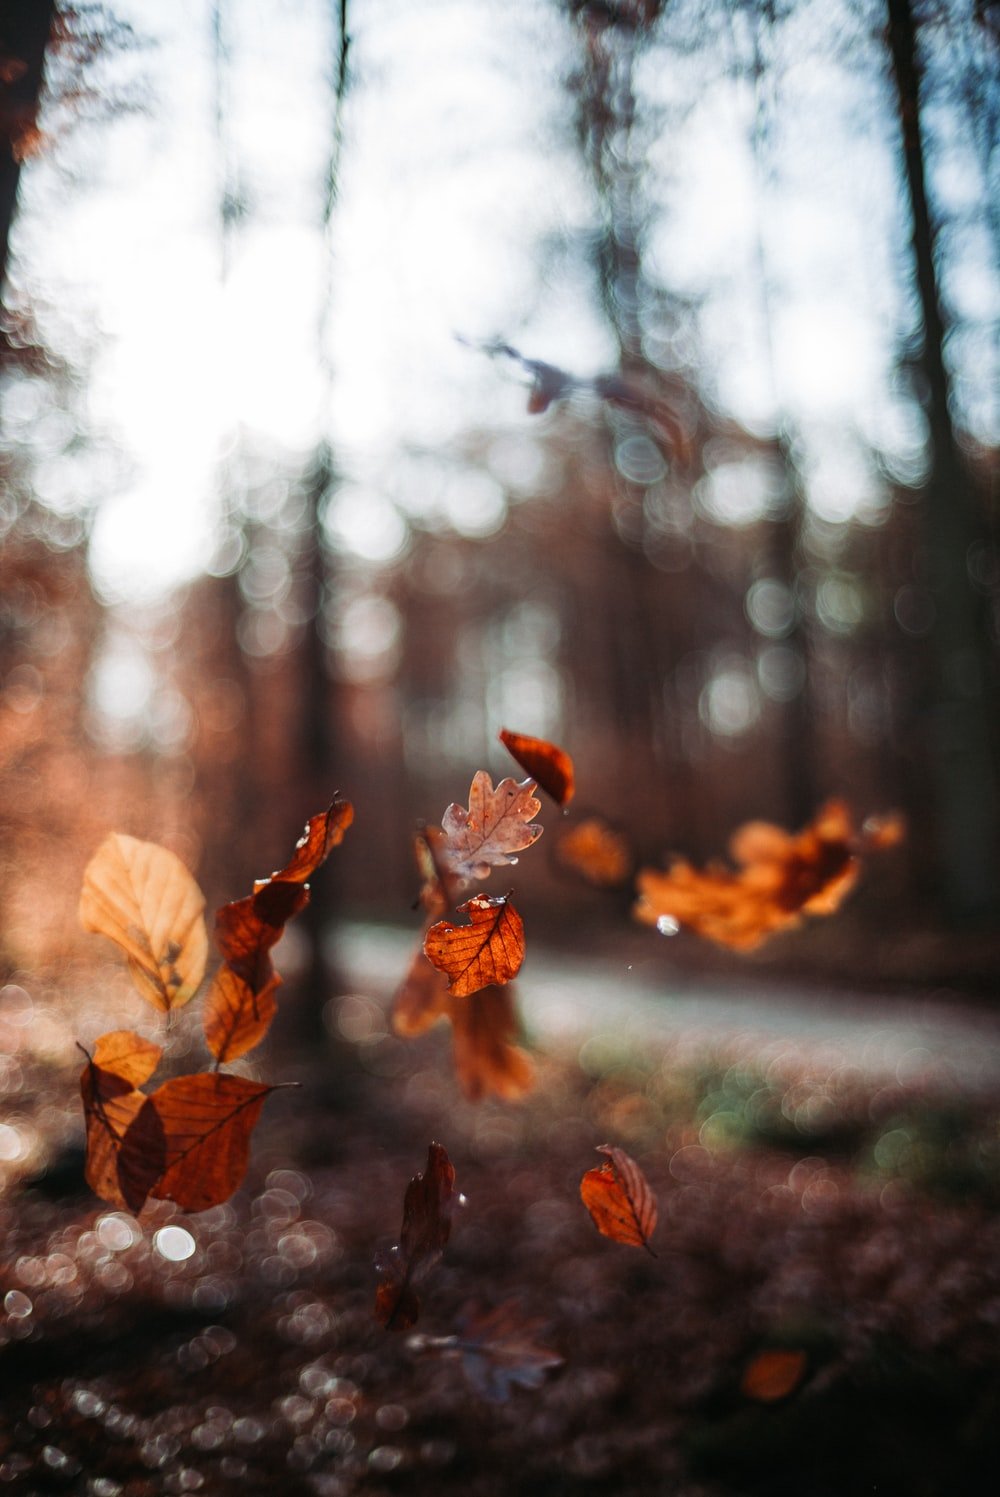 Falling Leaves Picture. Download Free Image